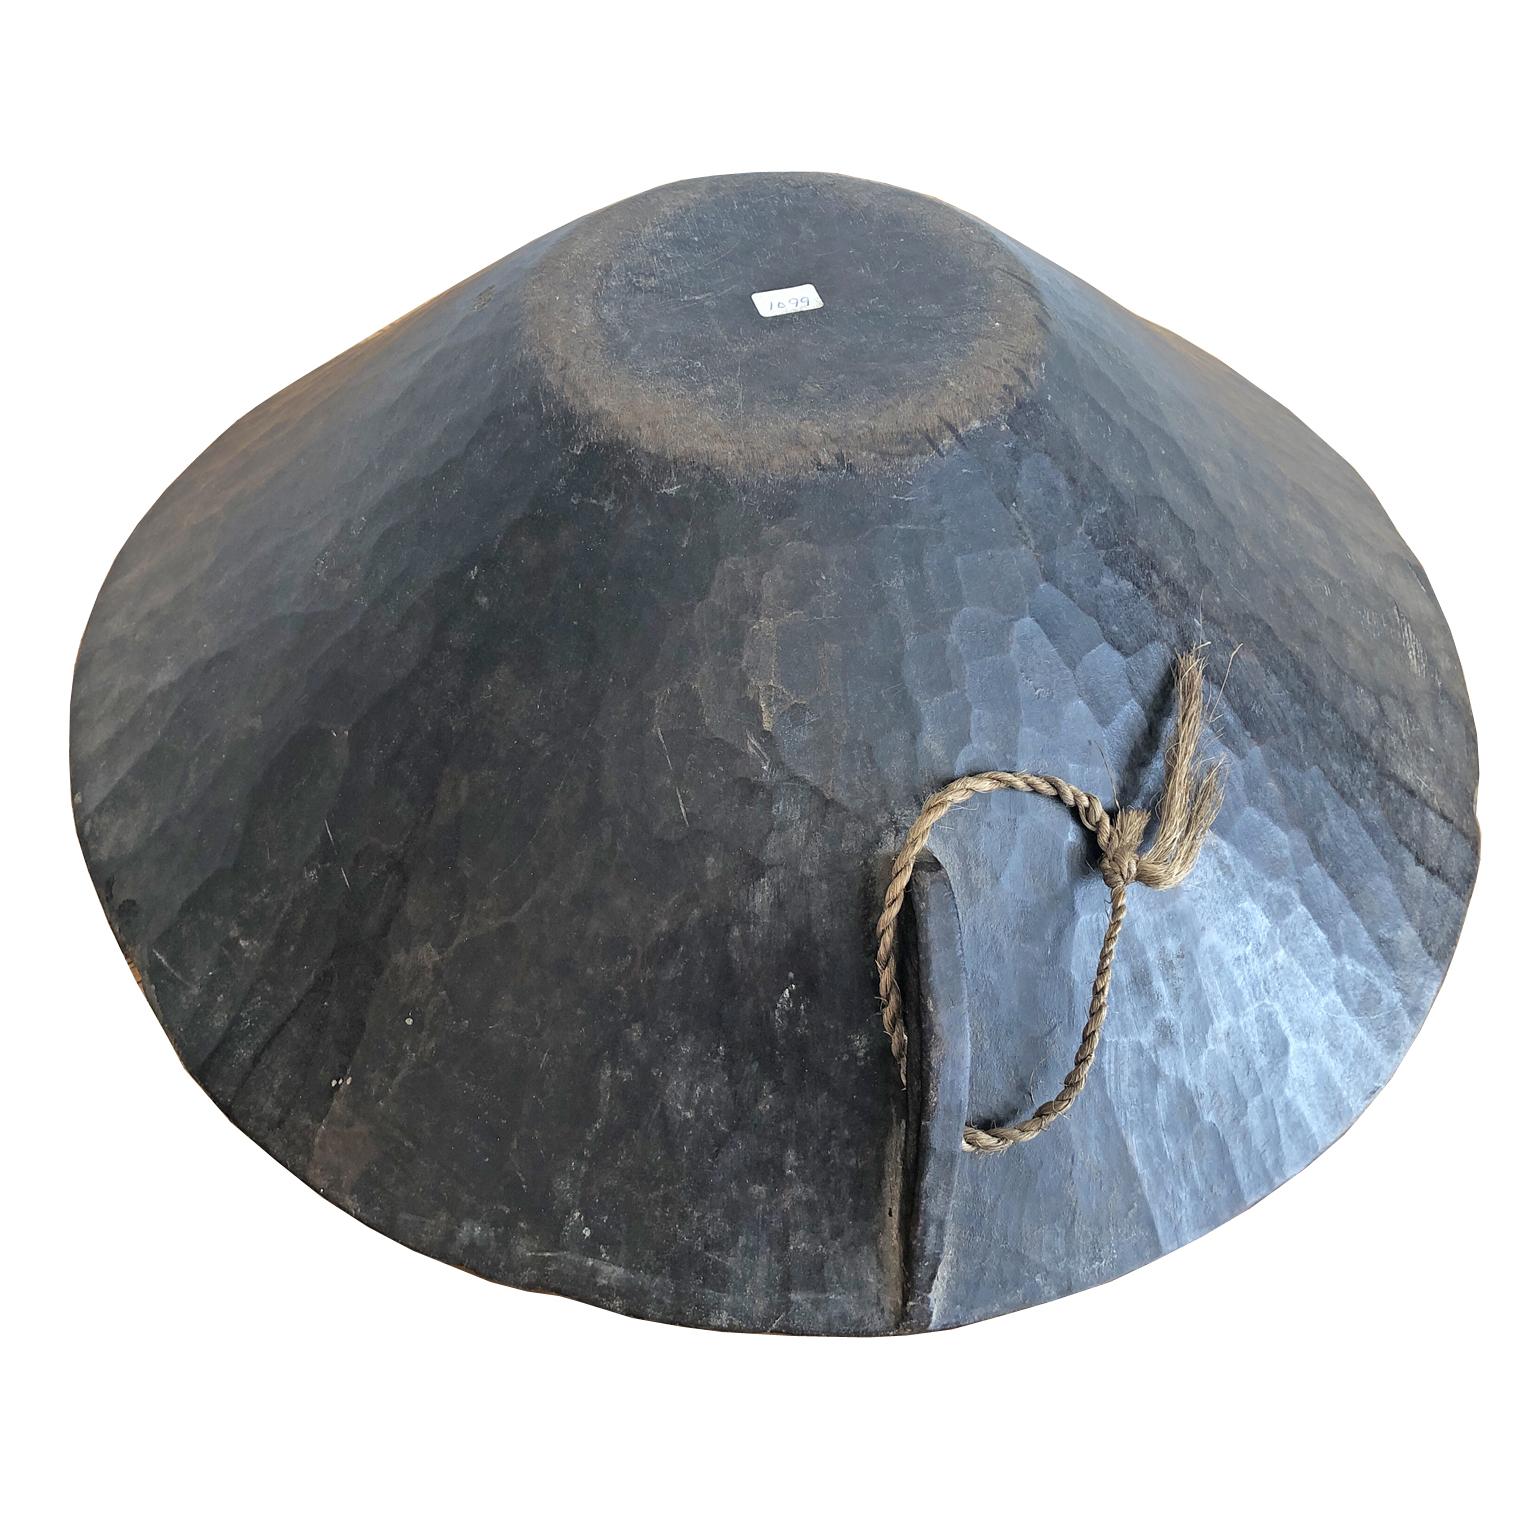 A beautiful dark, chocolate-colored wooden bowl made by the Gala or Karo people in Southern Ethiopia and carved out of a solid block of wood, it served as a utilitarian object in everyday tribal life (and was not made for commercial sale, which